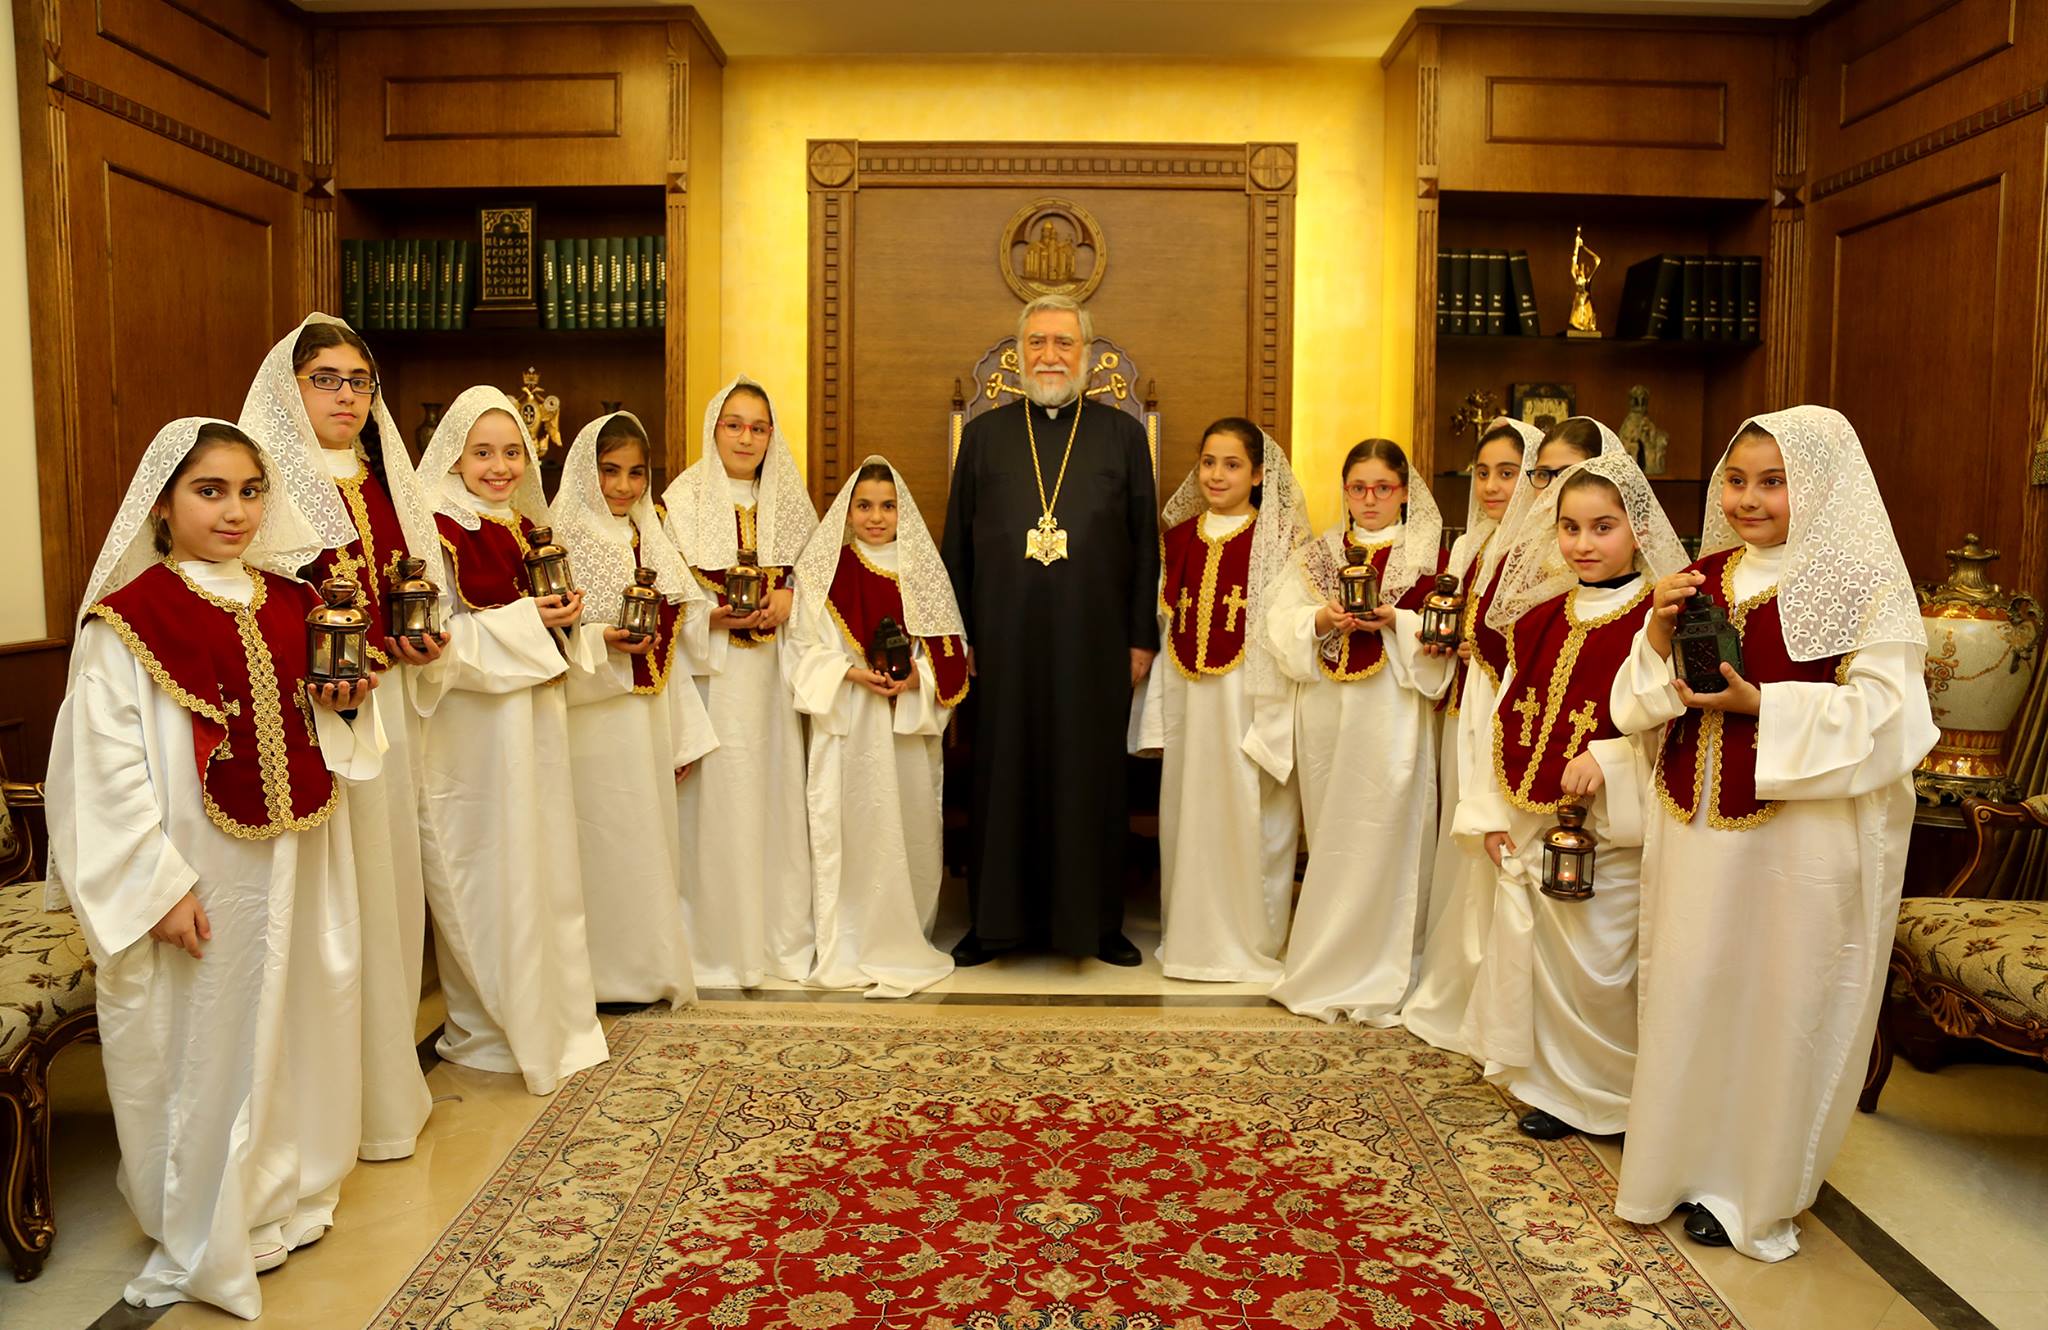 Commemoration of the Parable of the Ten Maidens in Antelias